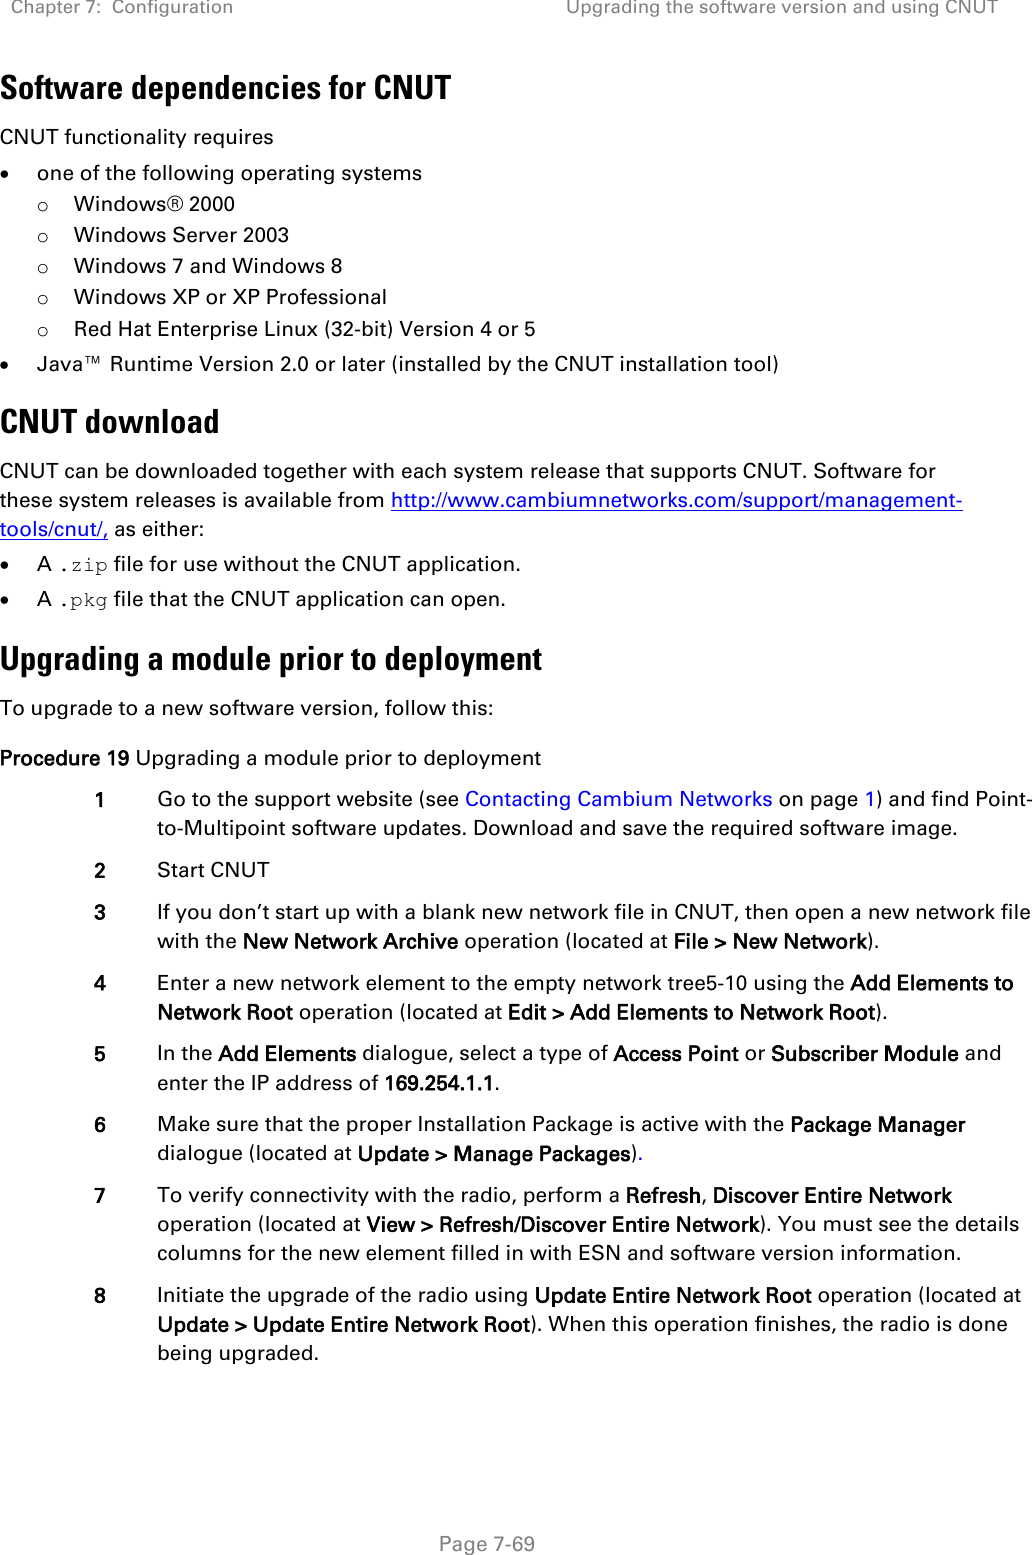 Chapter 7:  Configuration Upgrading the software version and using CNUT   Page 7-69 Software dependencies for CNUT CNUT functionality requires • one of the following operating systems o Windows® 2000 o Windows Server 2003 o Windows 7 and Windows 8 o Windows XP or XP Professional o Red Hat Enterprise Linux (32-bit) Version 4 or 5 • Java™ Runtime Version 2.0 or later (installed by the CNUT installation tool) CNUT download CNUT can be downloaded together with each system release that supports CNUT. Software for these system releases is available from http://www.cambiumnetworks.com/support/management-tools/cnut/, as either: • A .zip file for use without the CNUT application. • A .pkg file that the CNUT application can open. Upgrading a module prior to deployment To upgrade to a new software version, follow this: Procedure 19 Upgrading a module prior to deployment 1 Go to the support website (see Contacting Cambium Networks on page 1) and find Point-to-Multipoint software updates. Download and save the required software image. 2 Start CNUT 3 If you don’t start up with a blank new network file in CNUT, then open a new network file with the New Network Archive operation (located at File &gt; New Network). 4 Enter a new network element to the empty network tree5-10 using the Add Elements to Network Root operation (located at Edit &gt; Add Elements to Network Root). 5 In the Add Elements dialogue, select a type of Access Point or Subscriber Module and enter the IP address of 169.254.1.1. 6 Make sure that the proper Installation Package is active with the Package Manager dialogue (located at Update &gt; Manage Packages). 7 To verify connectivity with the radio, perform a Refresh, Discover Entire Network operation (located at View &gt; Refresh/Discover Entire Network). You must see the details columns for the new element filled in with ESN and software version information. 8 Initiate the upgrade of the radio using Update Entire Network Root operation (located at Update &gt; Update Entire Network Root). When this operation finishes, the radio is done being upgraded. 